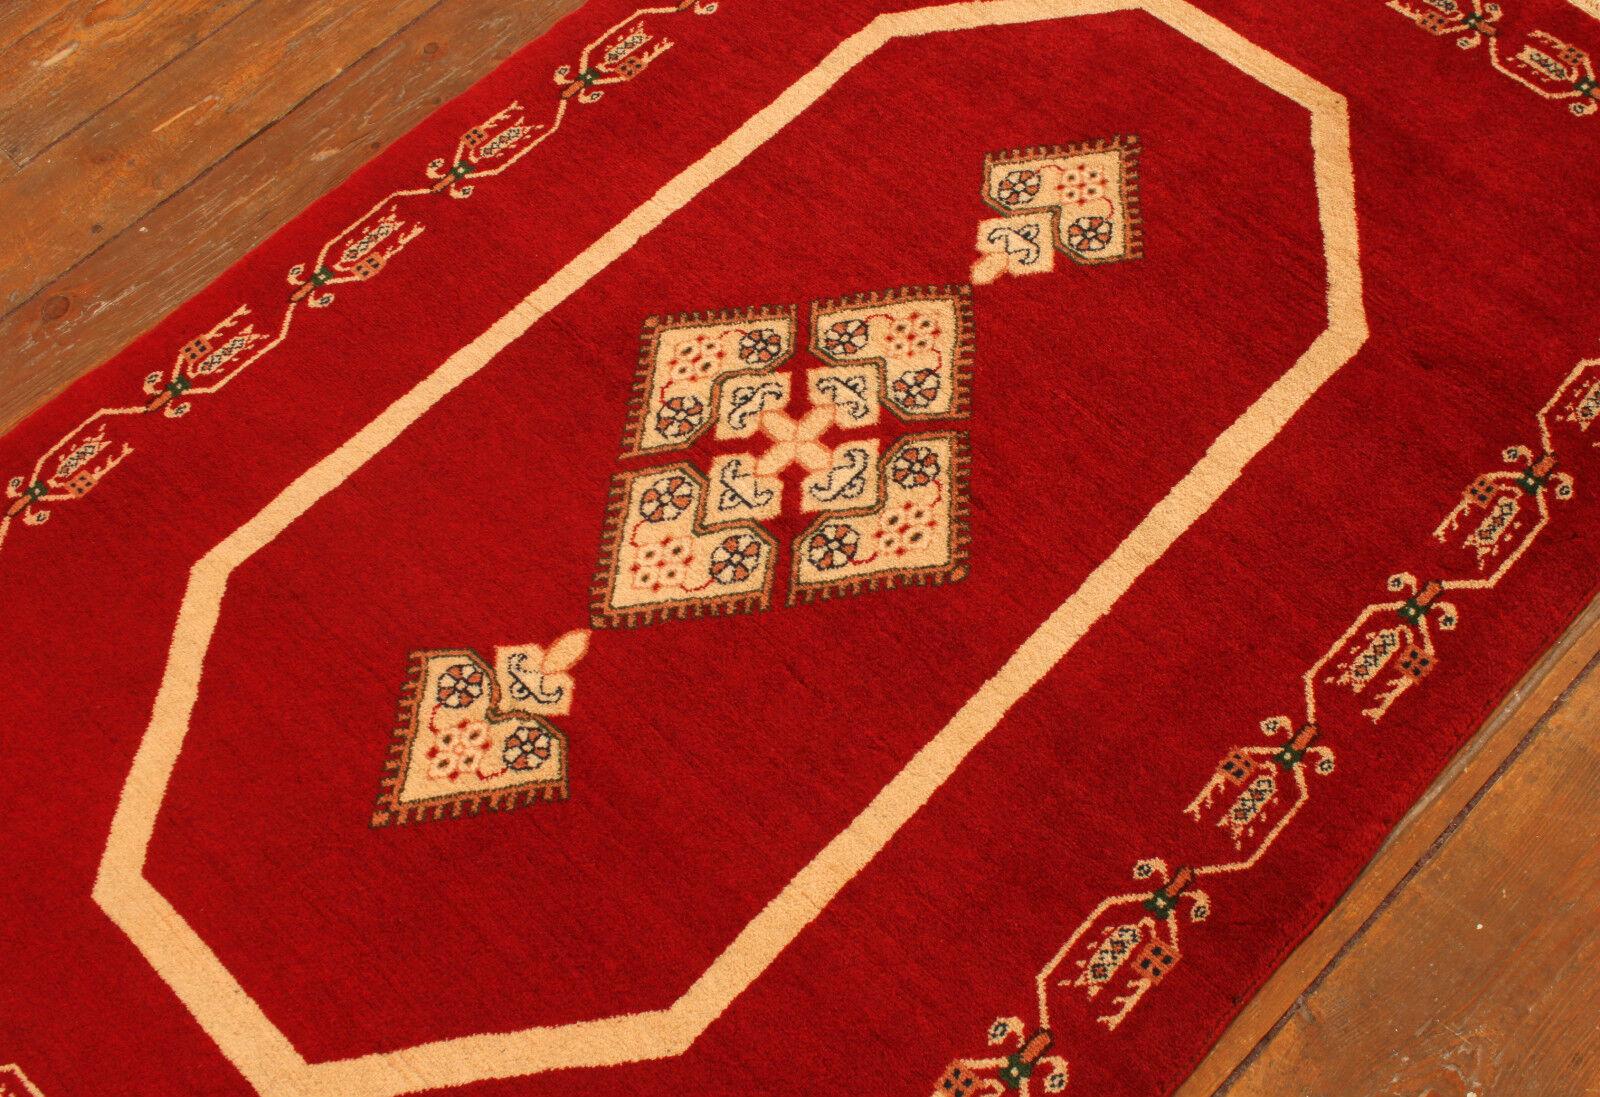 Handmade Vintage Persian Yalameh Rug 101cm x 157cm (3.3’ x 5.1’)

Embrace the rich heritage of Persian weaving with this Handmade Vintage Persian Yalameh Rug from the 1970s. Measuring 3.3’ x 5.1’, this woolen gem is a testament to the enduring